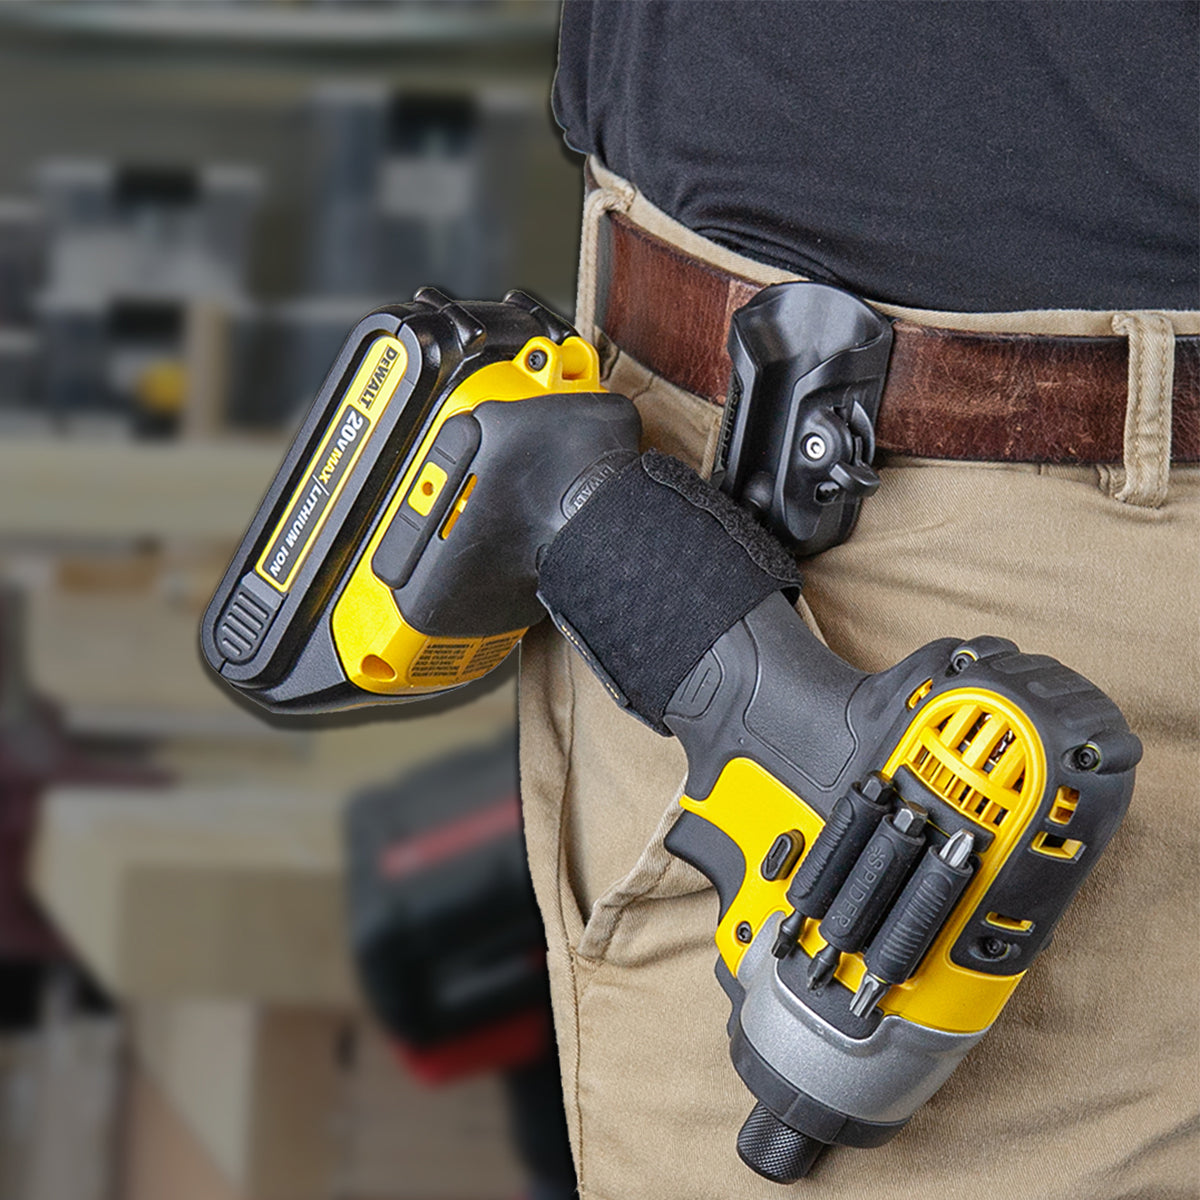 Spider Tool Holster - The quick-draw solution for carrying your tools!